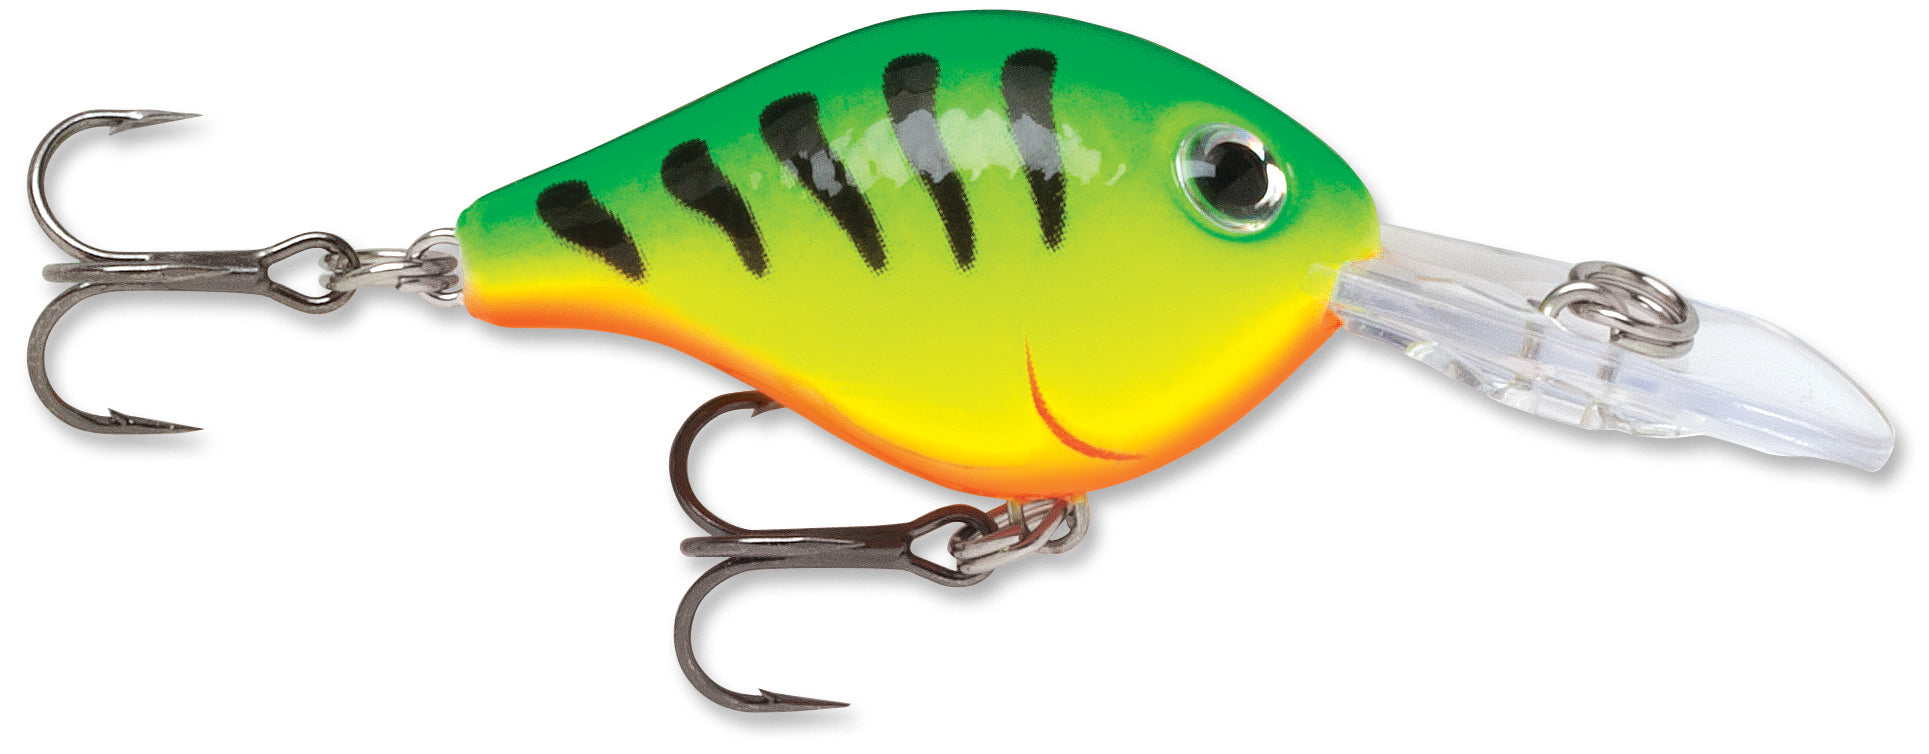 Ultralight Fishing Lures Set With Crankbait, Insect Popper Hooks, And Bass  Bait 8.8g/8cm From Xzxzccc, $7.03